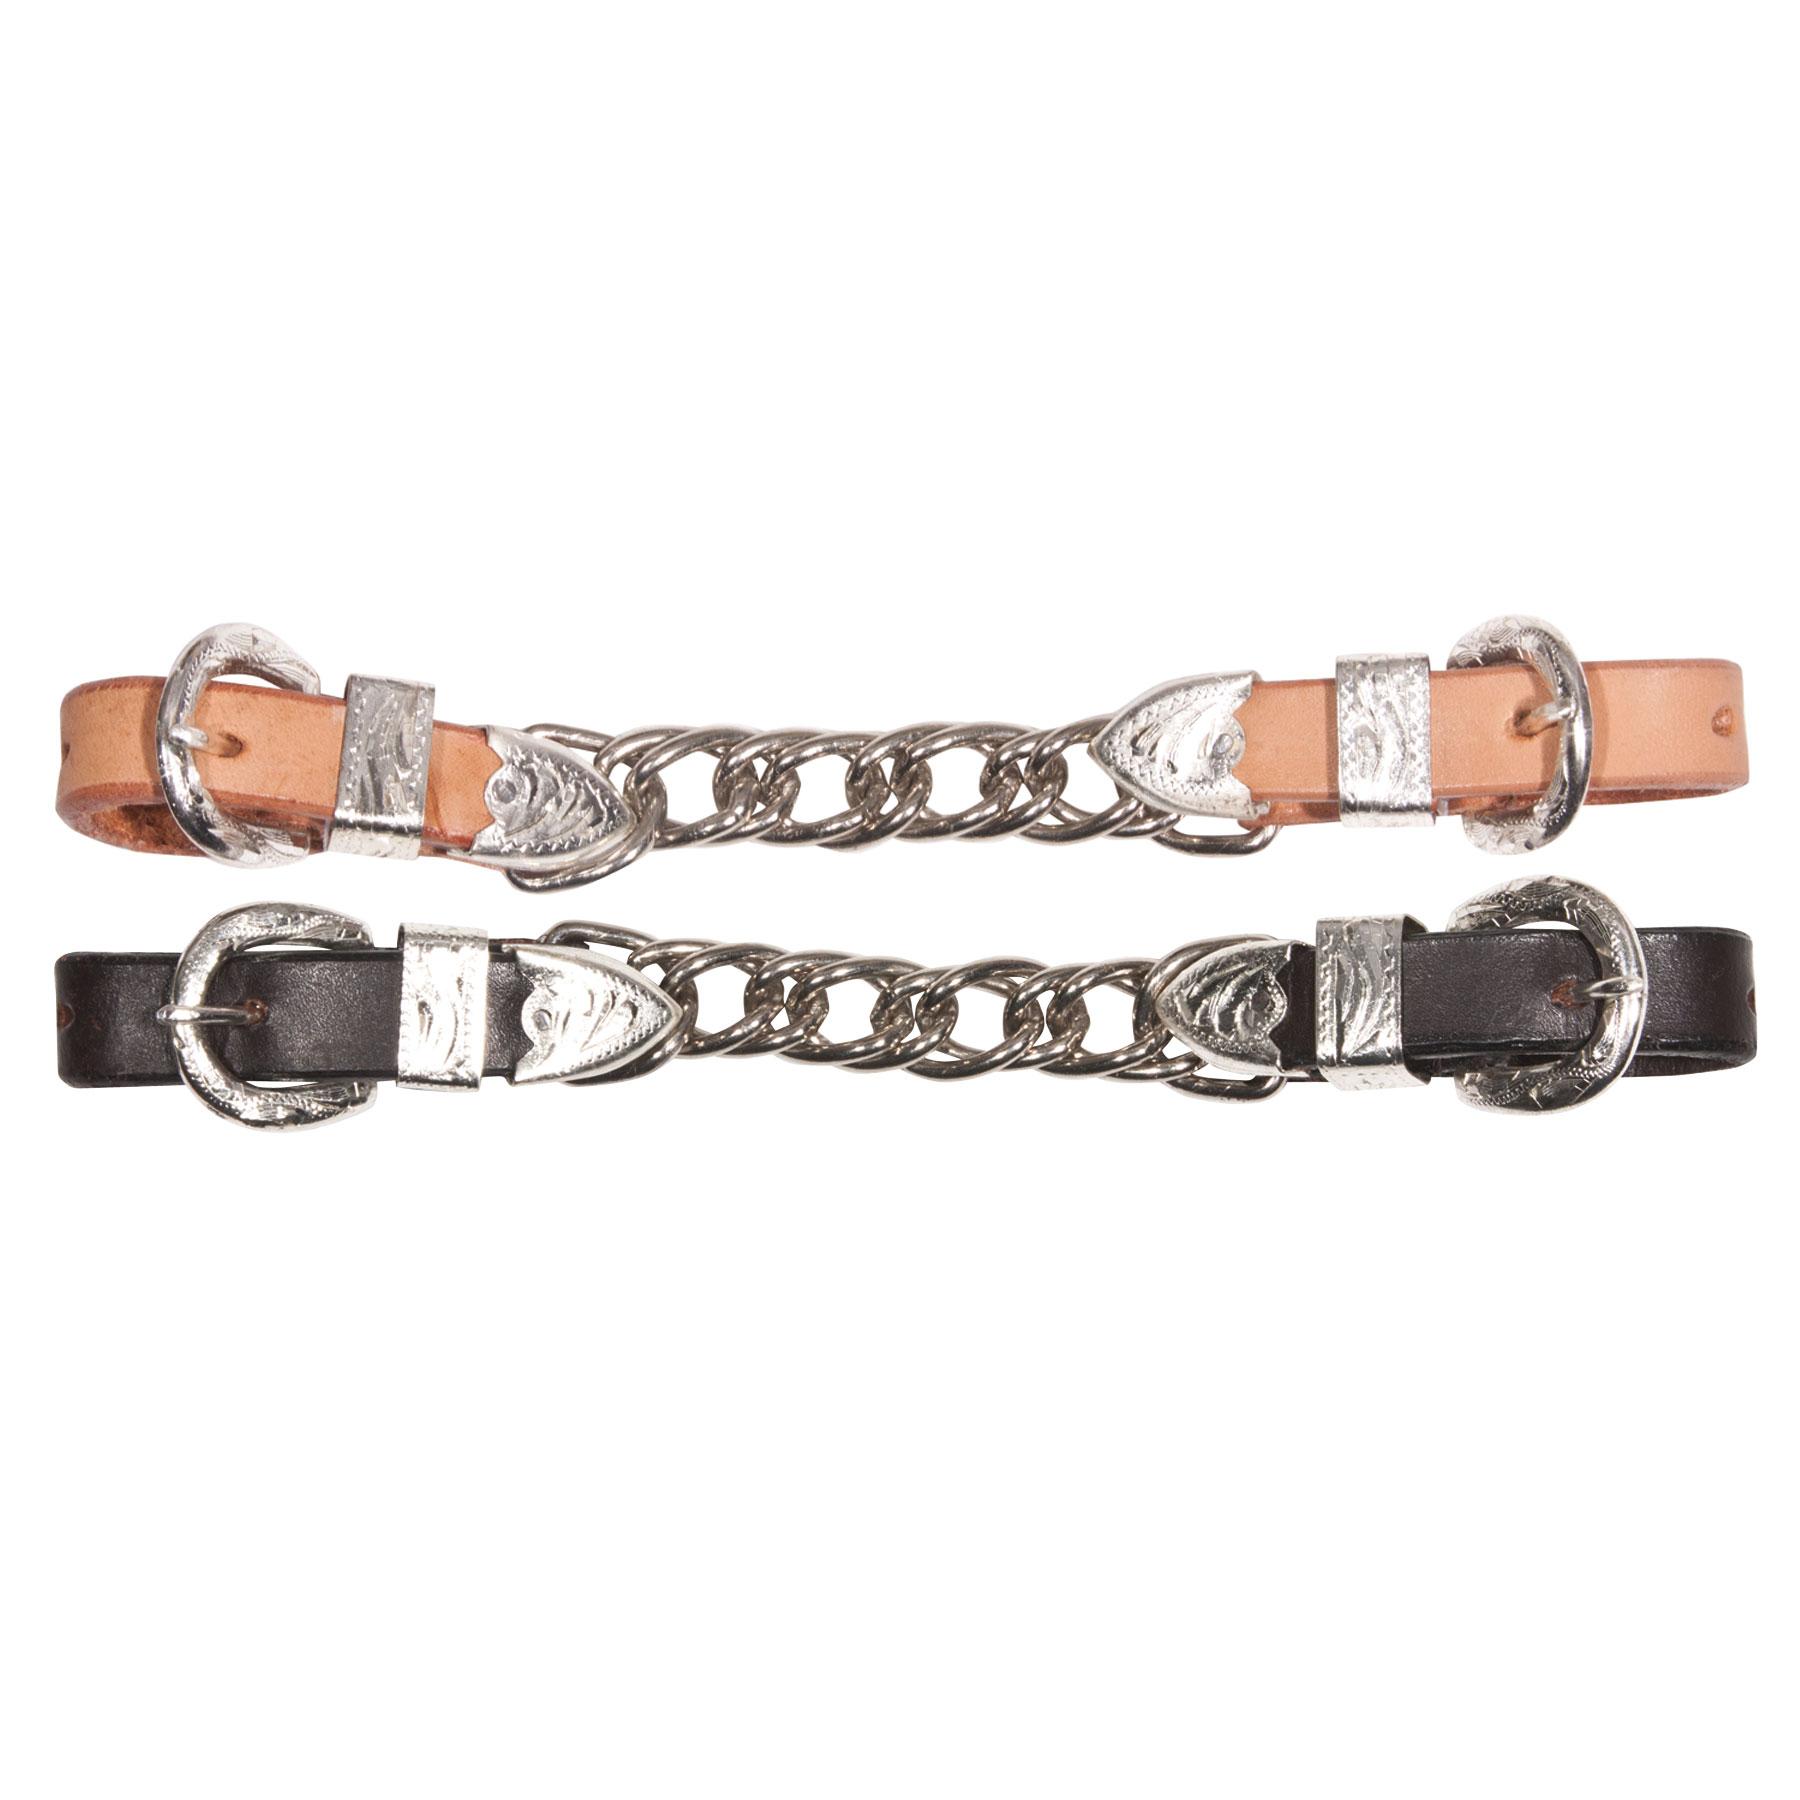 Light Oil Leather Tips Keeps Silver Buckles Western Show Curb Chain 